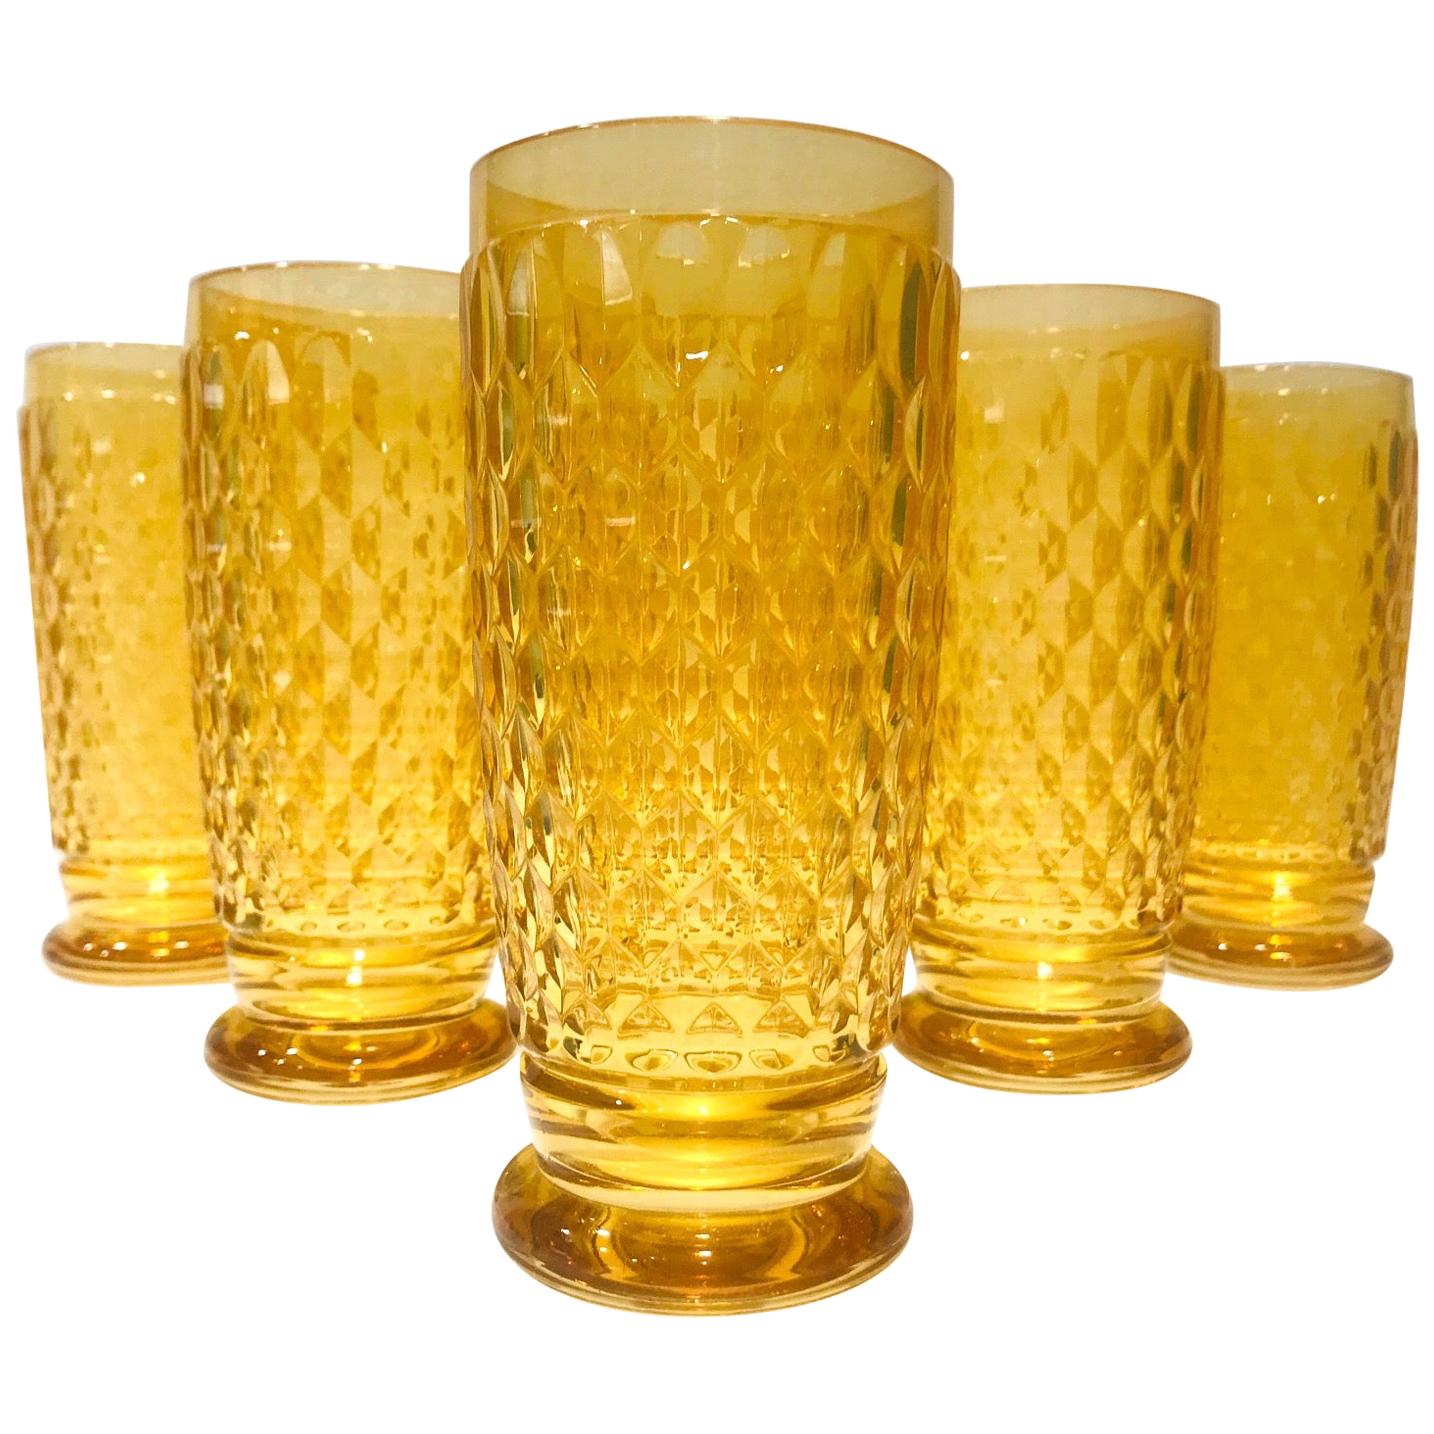 Set of Seven Villeroy & Boch Crystal Highball Glasses in Amber Yellow circa 2005